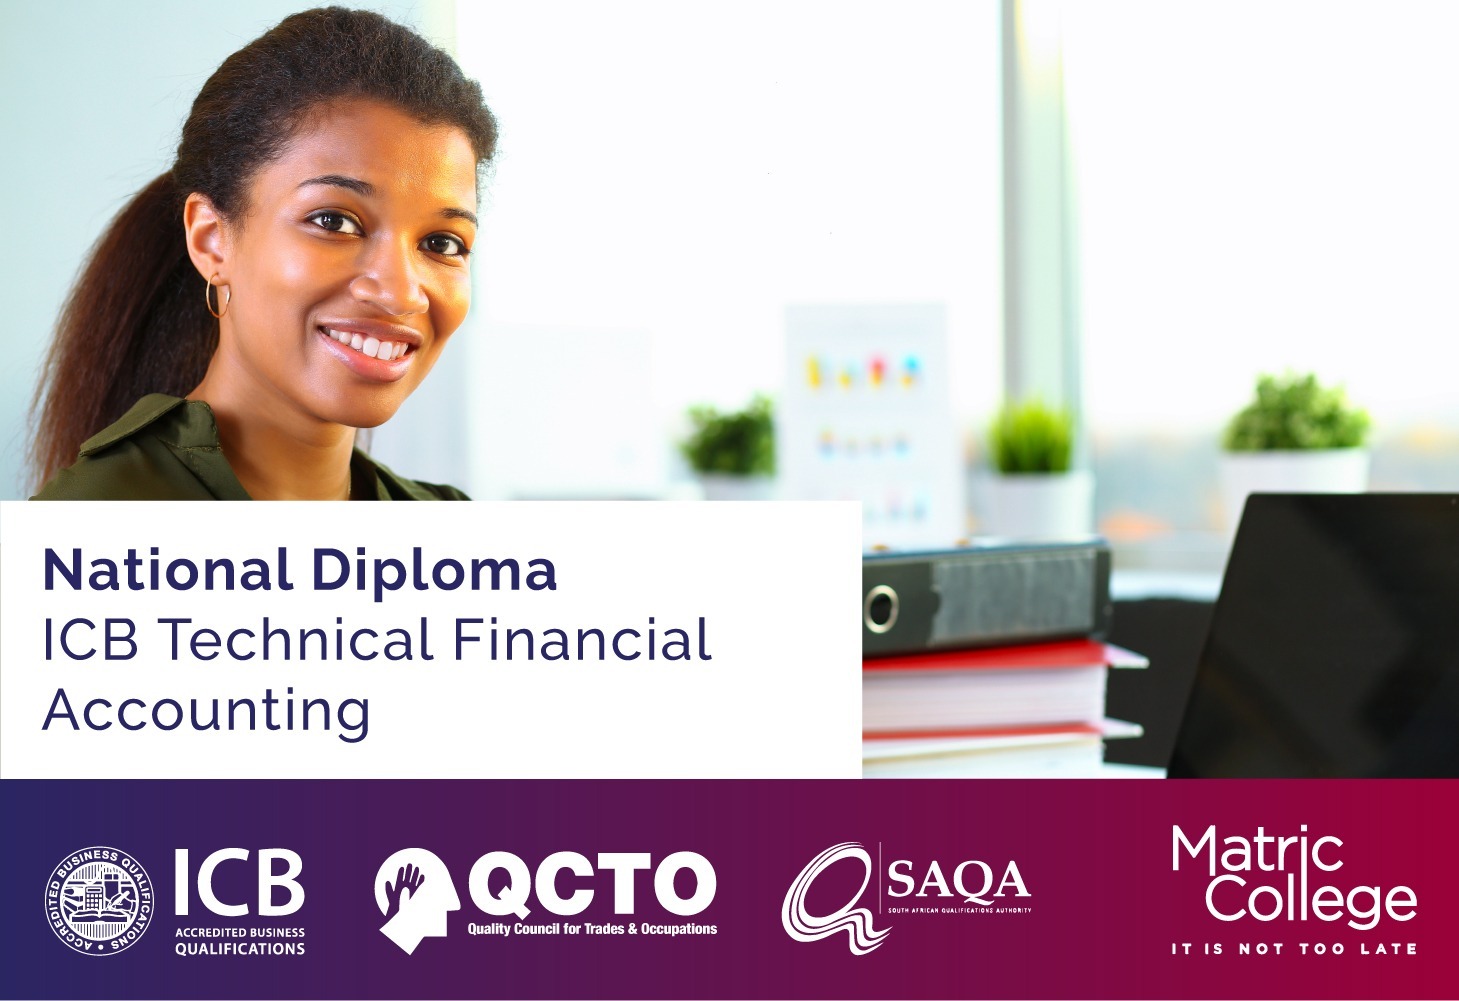 ICB Technical Financial Accounting